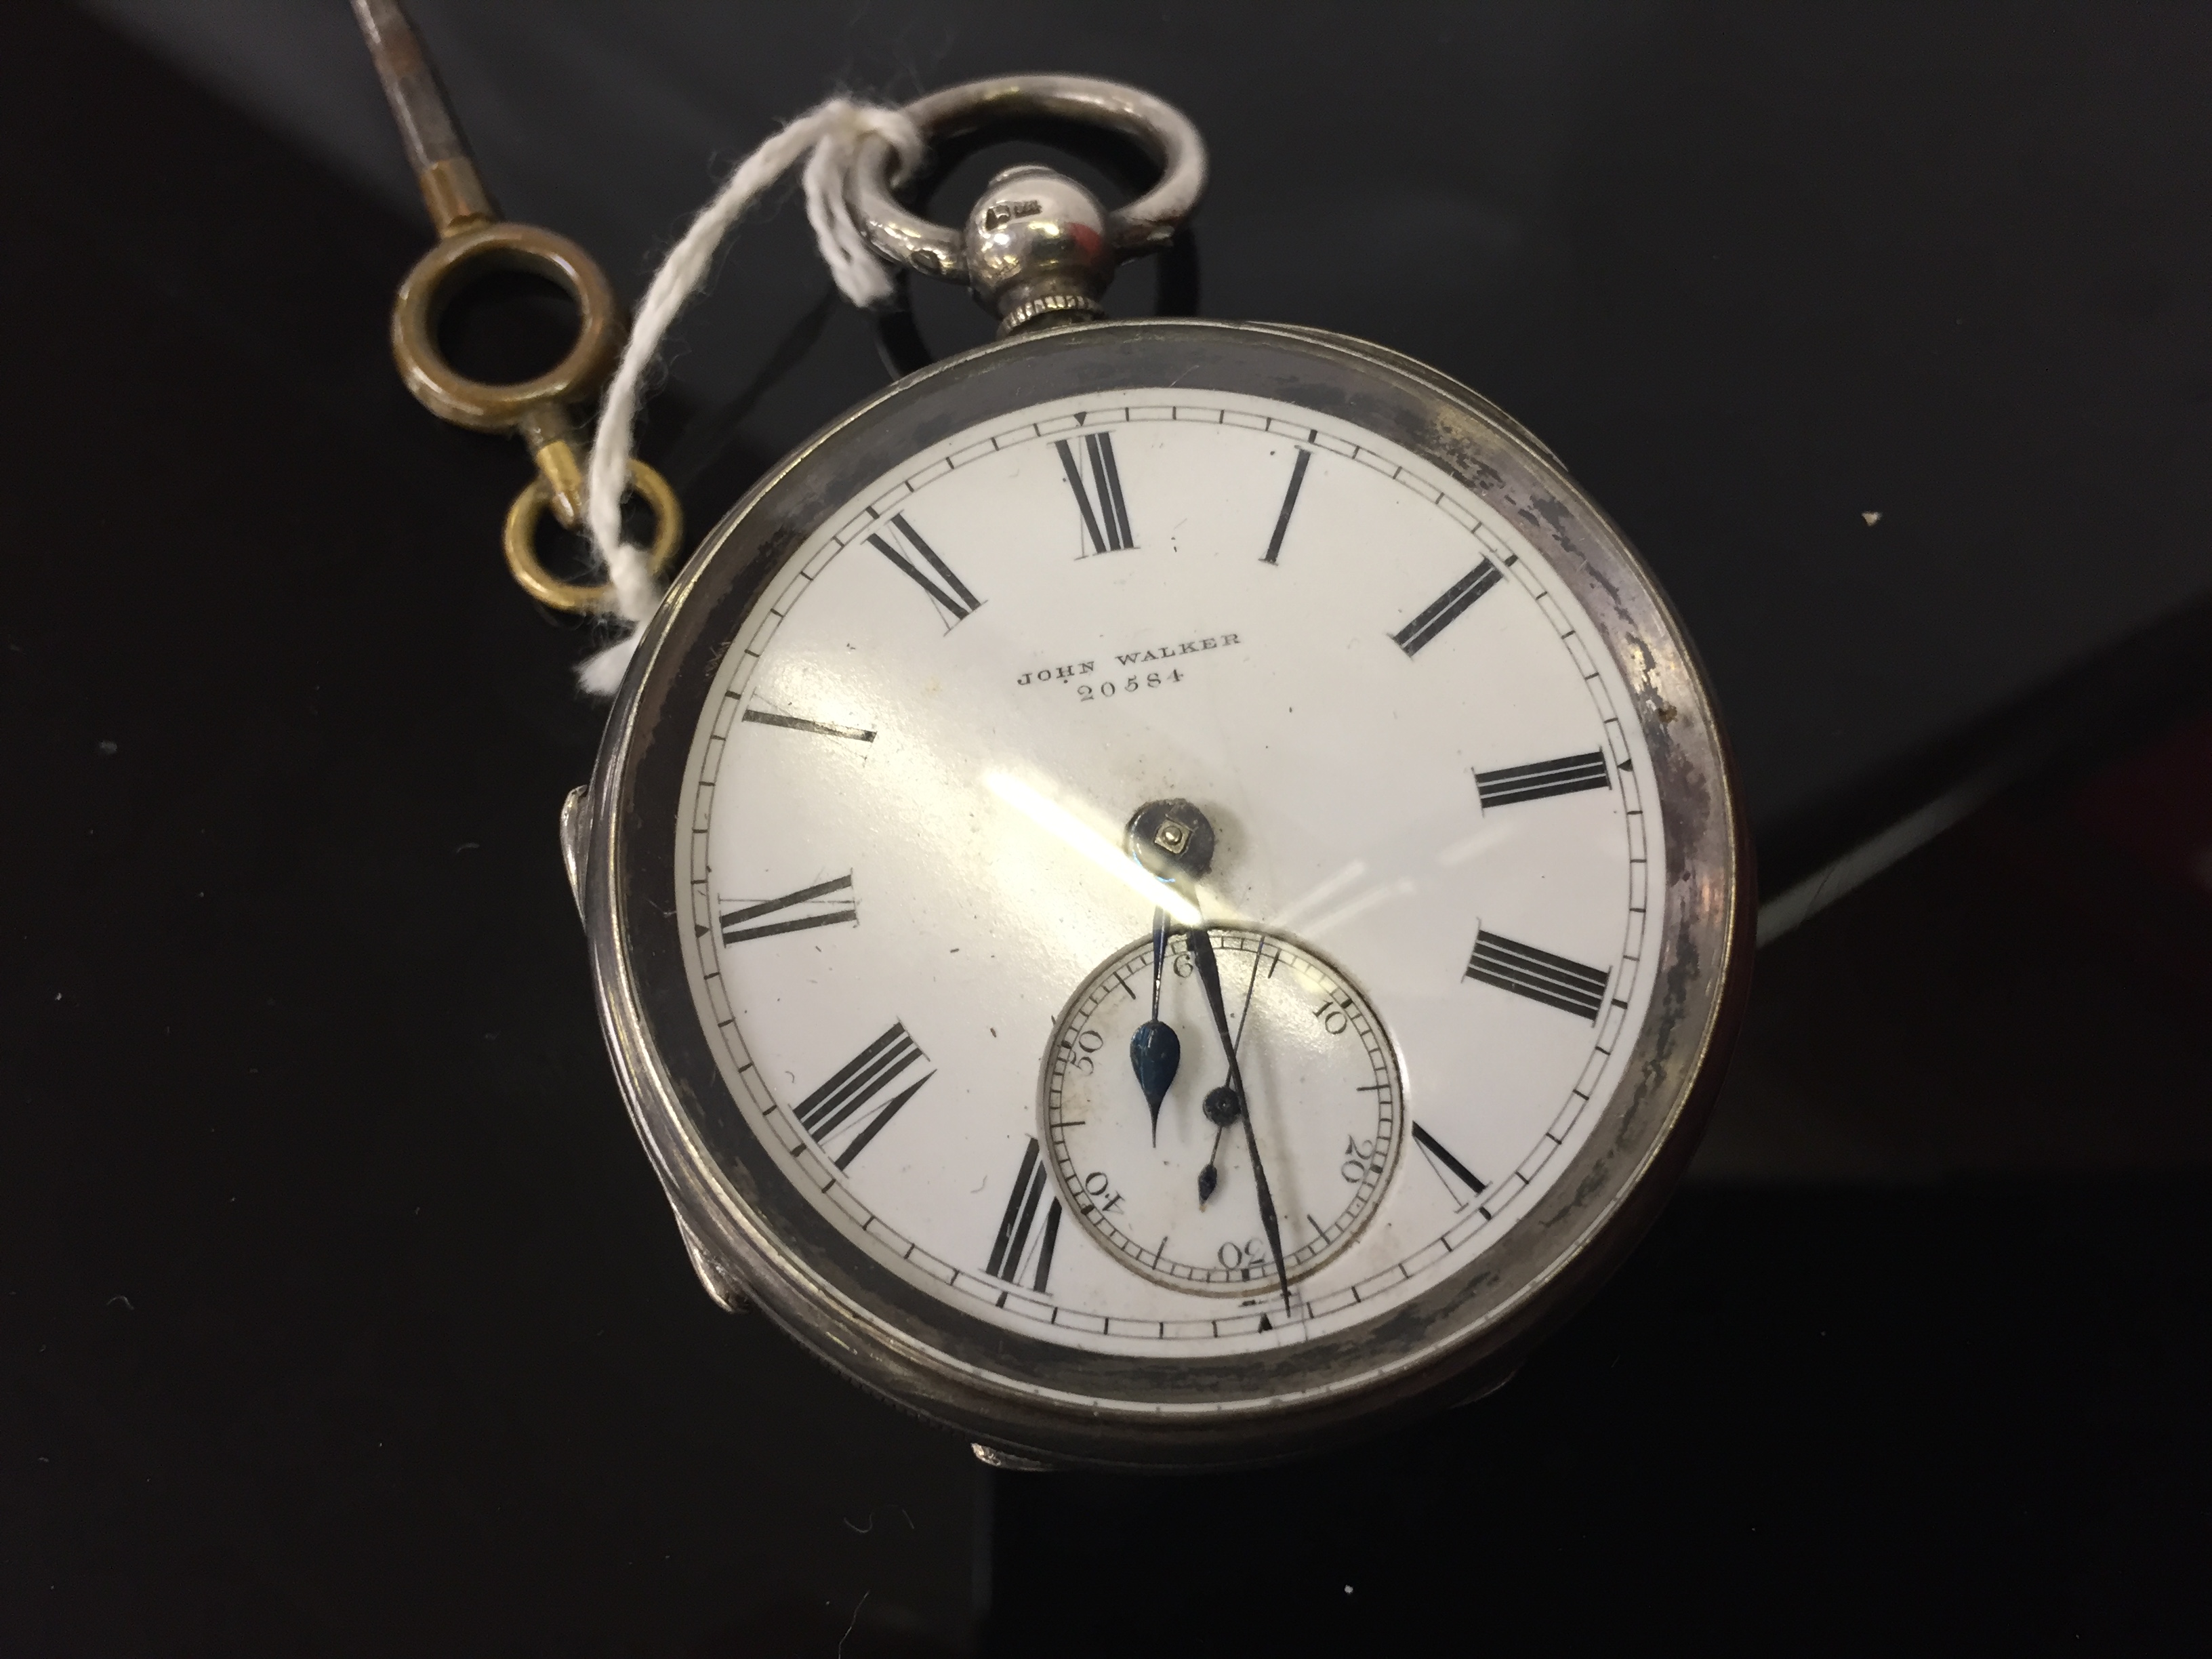 SILVER CASED POCKET WATCH BY JOHN WALKER OF LONDON, HALL MARKED FOR 1887. - Image 3 of 5